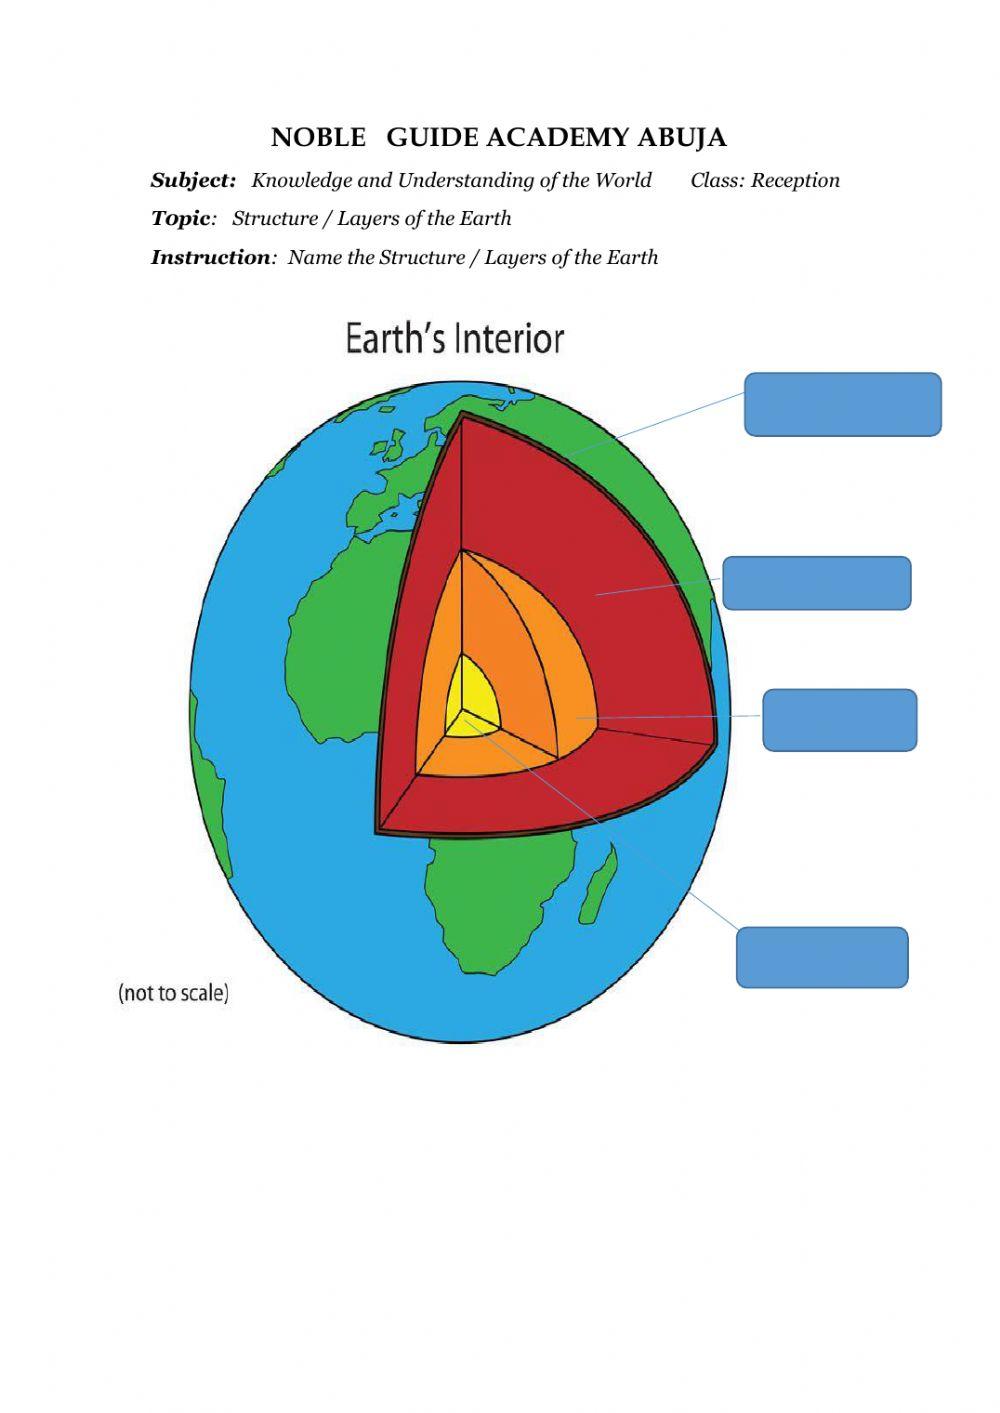 Layers- Structure of the Earth